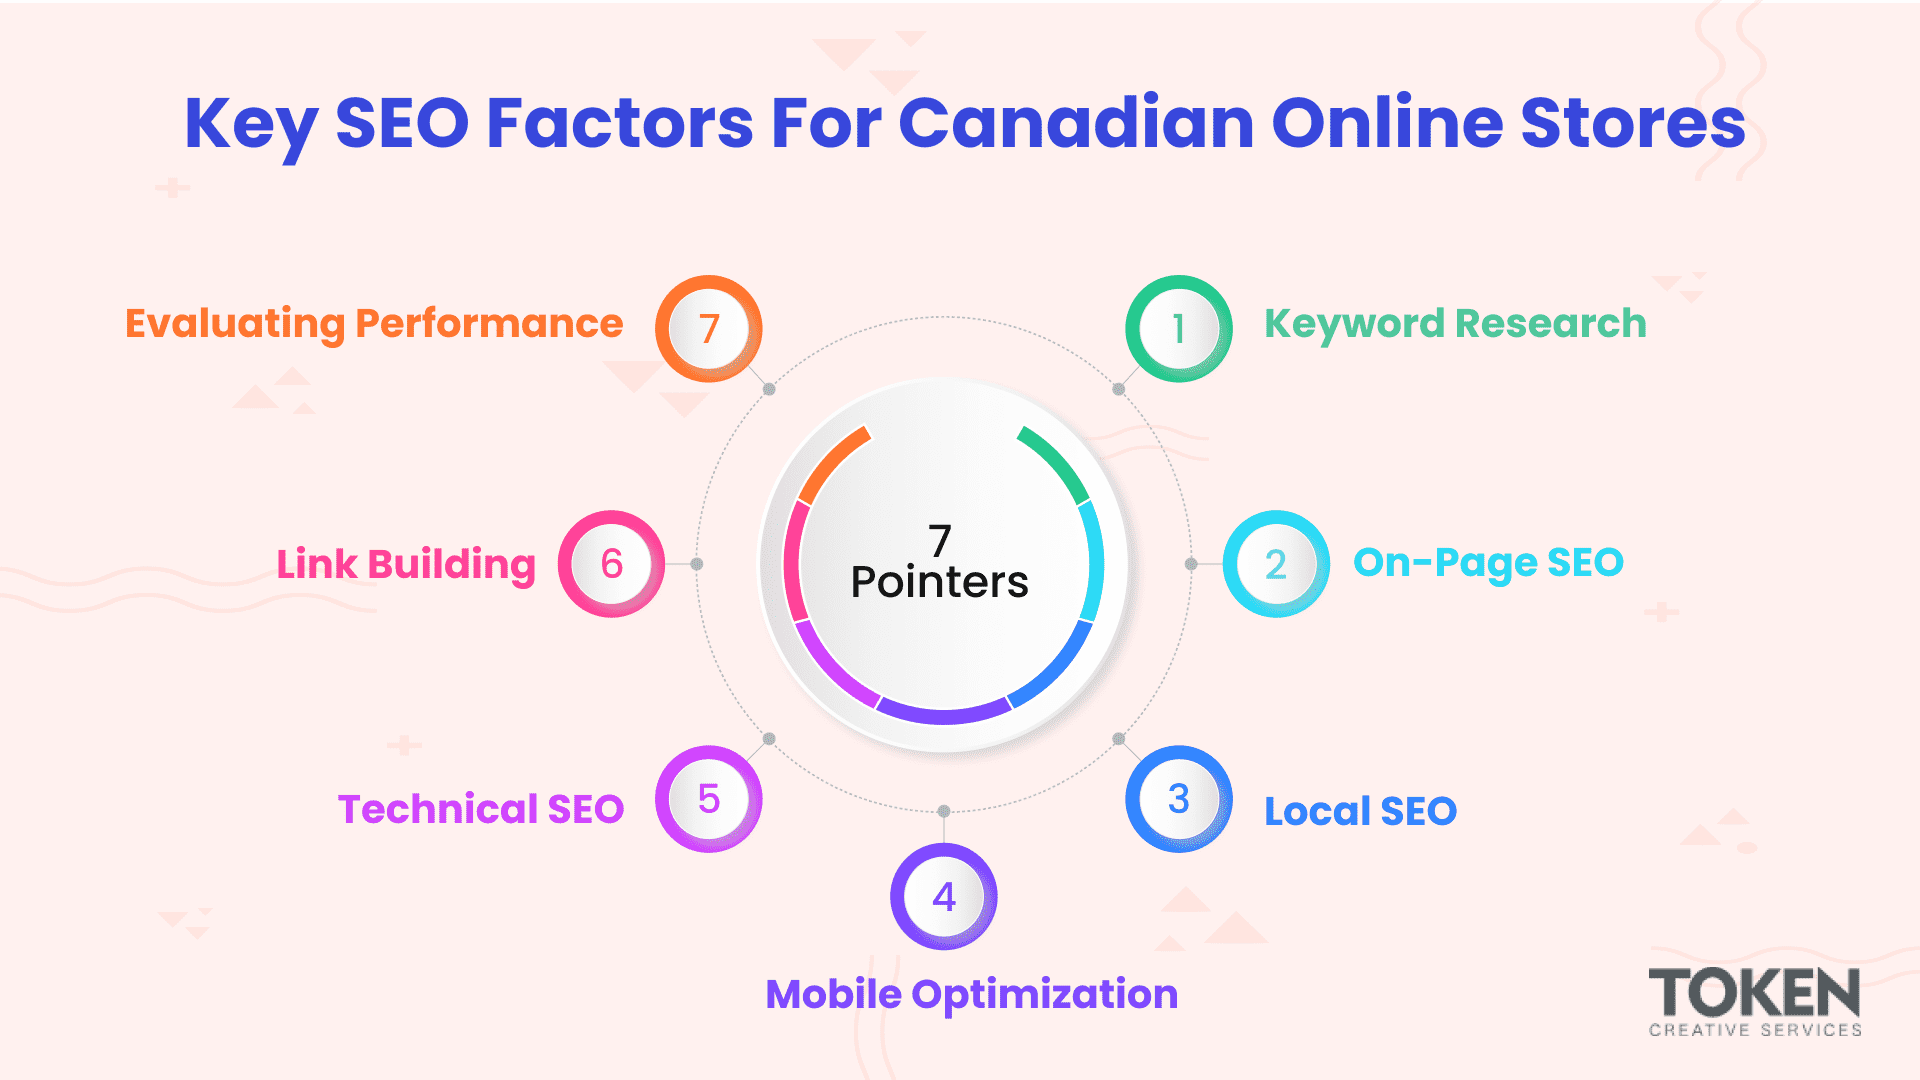 Key SEO Factors for Canadian Online Stores